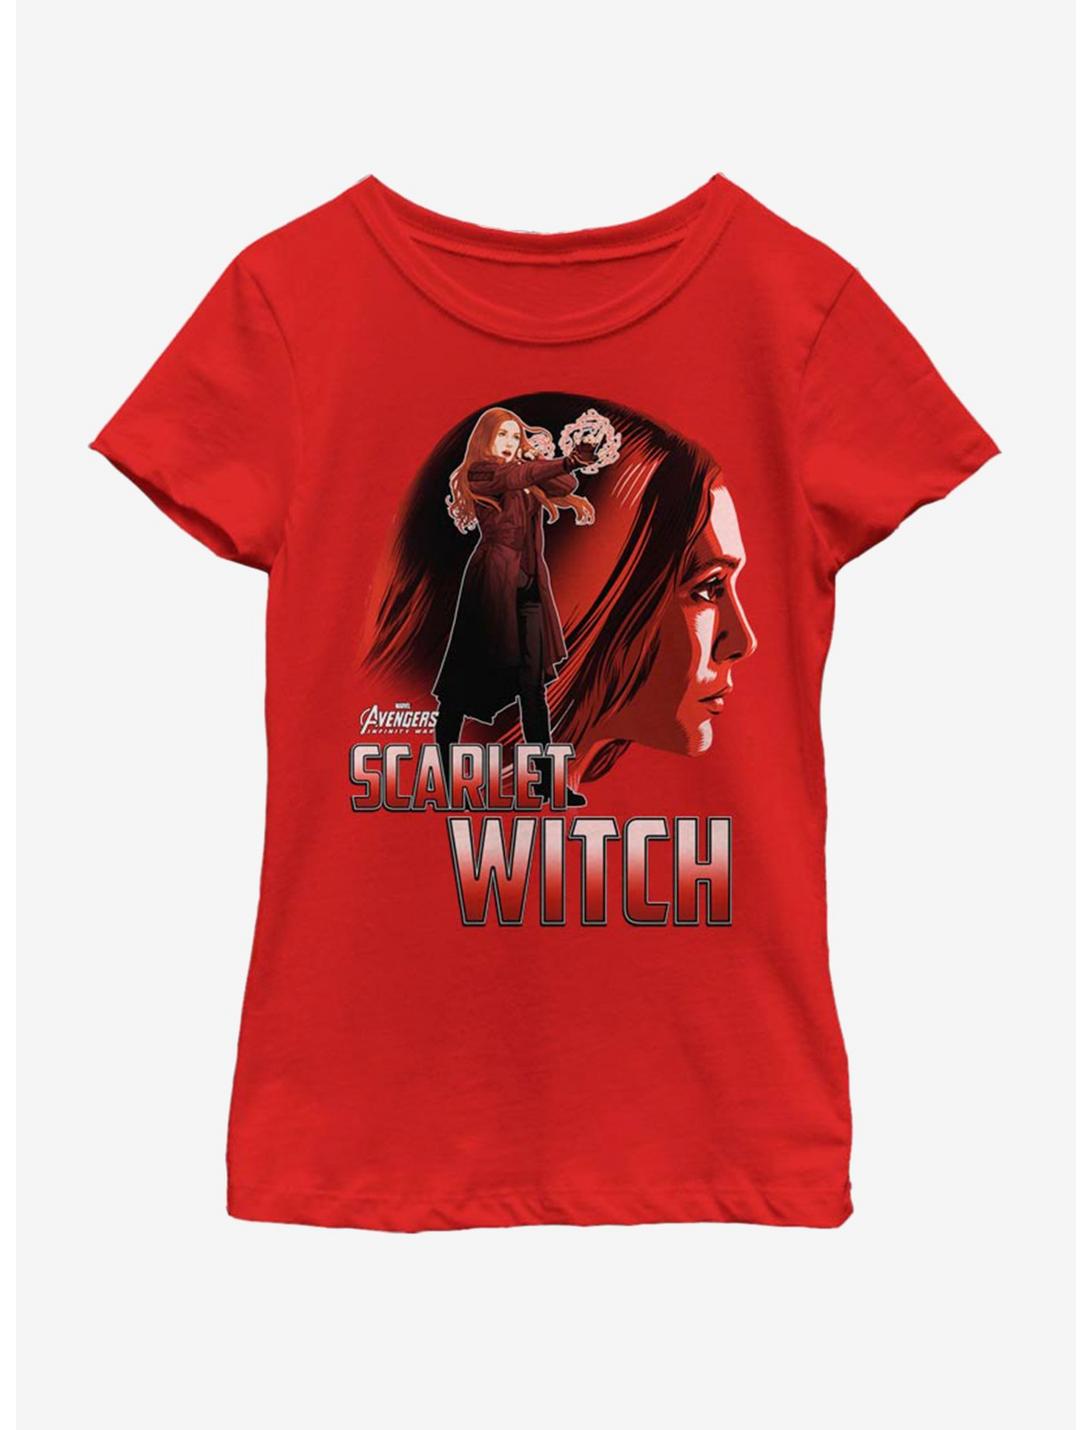 Marvel Avengers Infinity War Scarlet Witch Sil Youth Girls T-Shirt, RED, hi-res